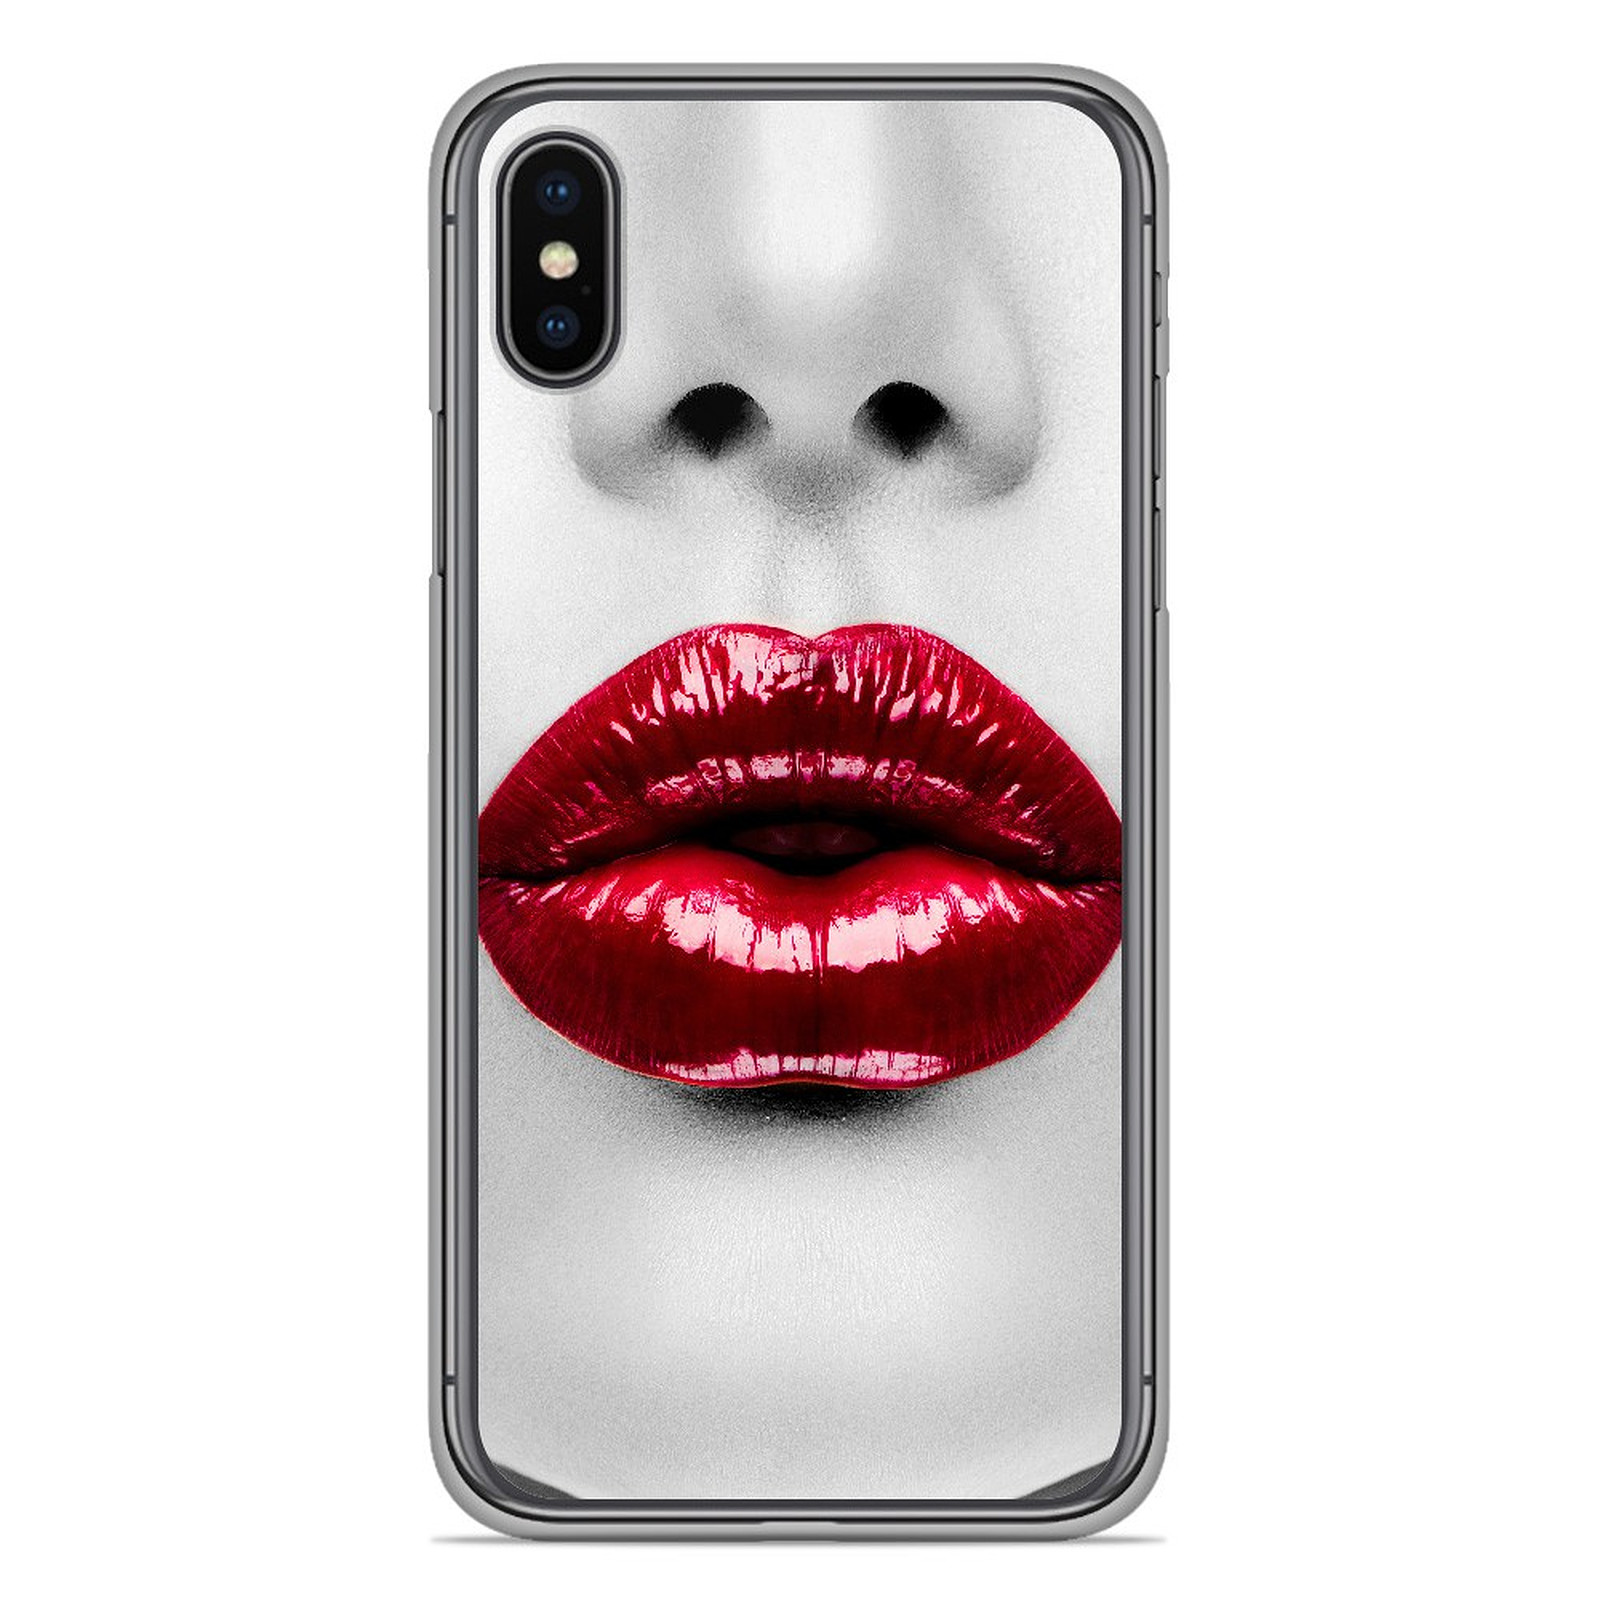 1001 Coques Coque silicone gel Apple iPhone X motif Lèvres Rouges - Coque telephone 1001Coques